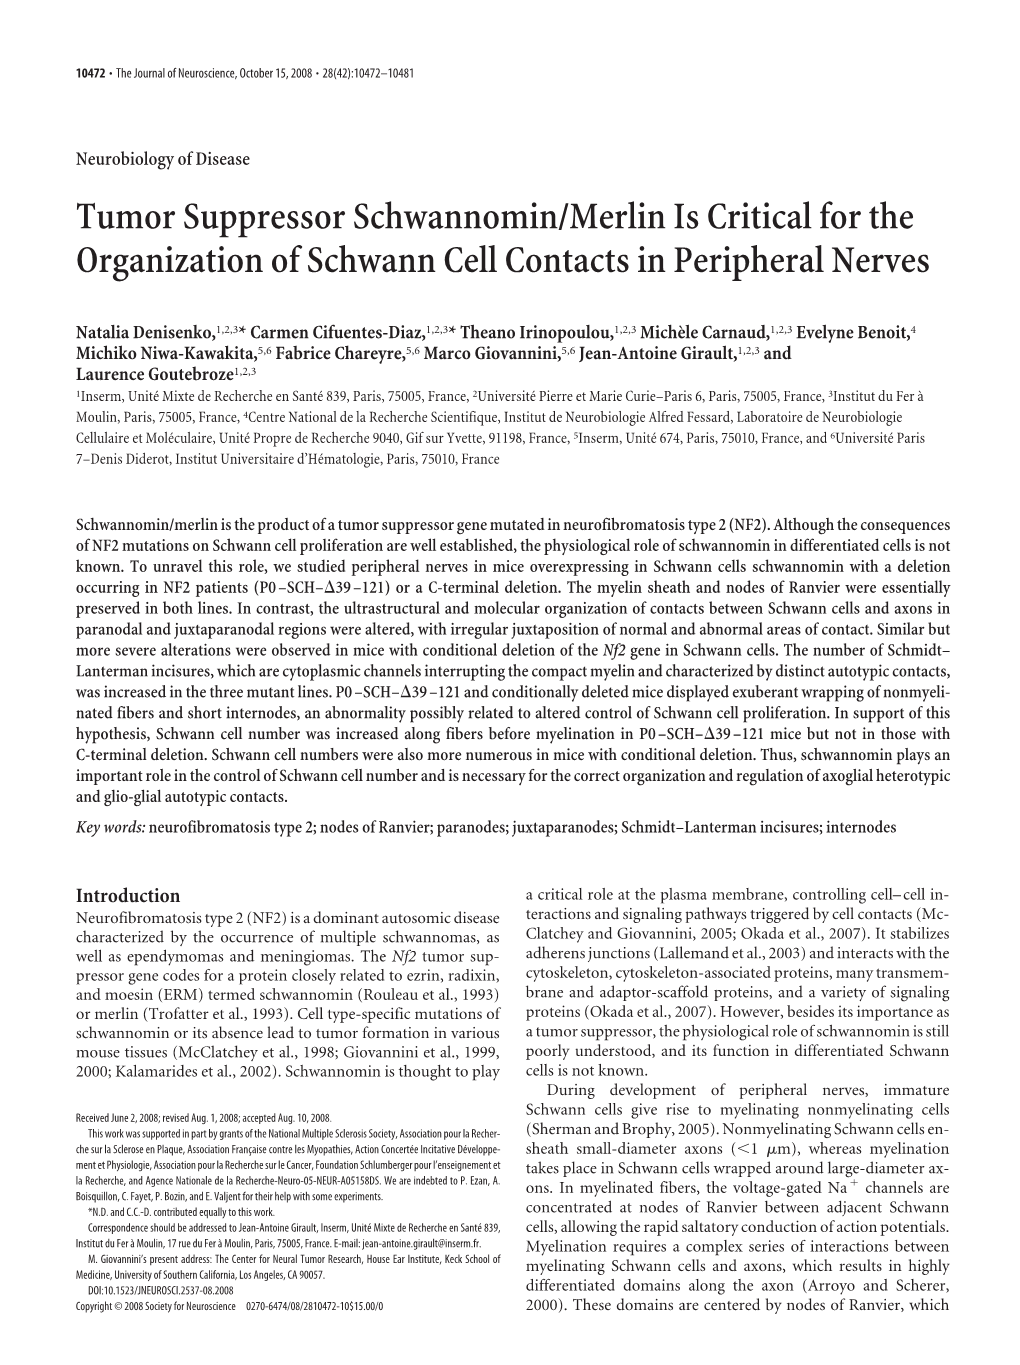 Tumor Suppressor Schwannomin/Merlin Is Critical for the Organization of Schwann Cell Contacts in Peripheral Nerves